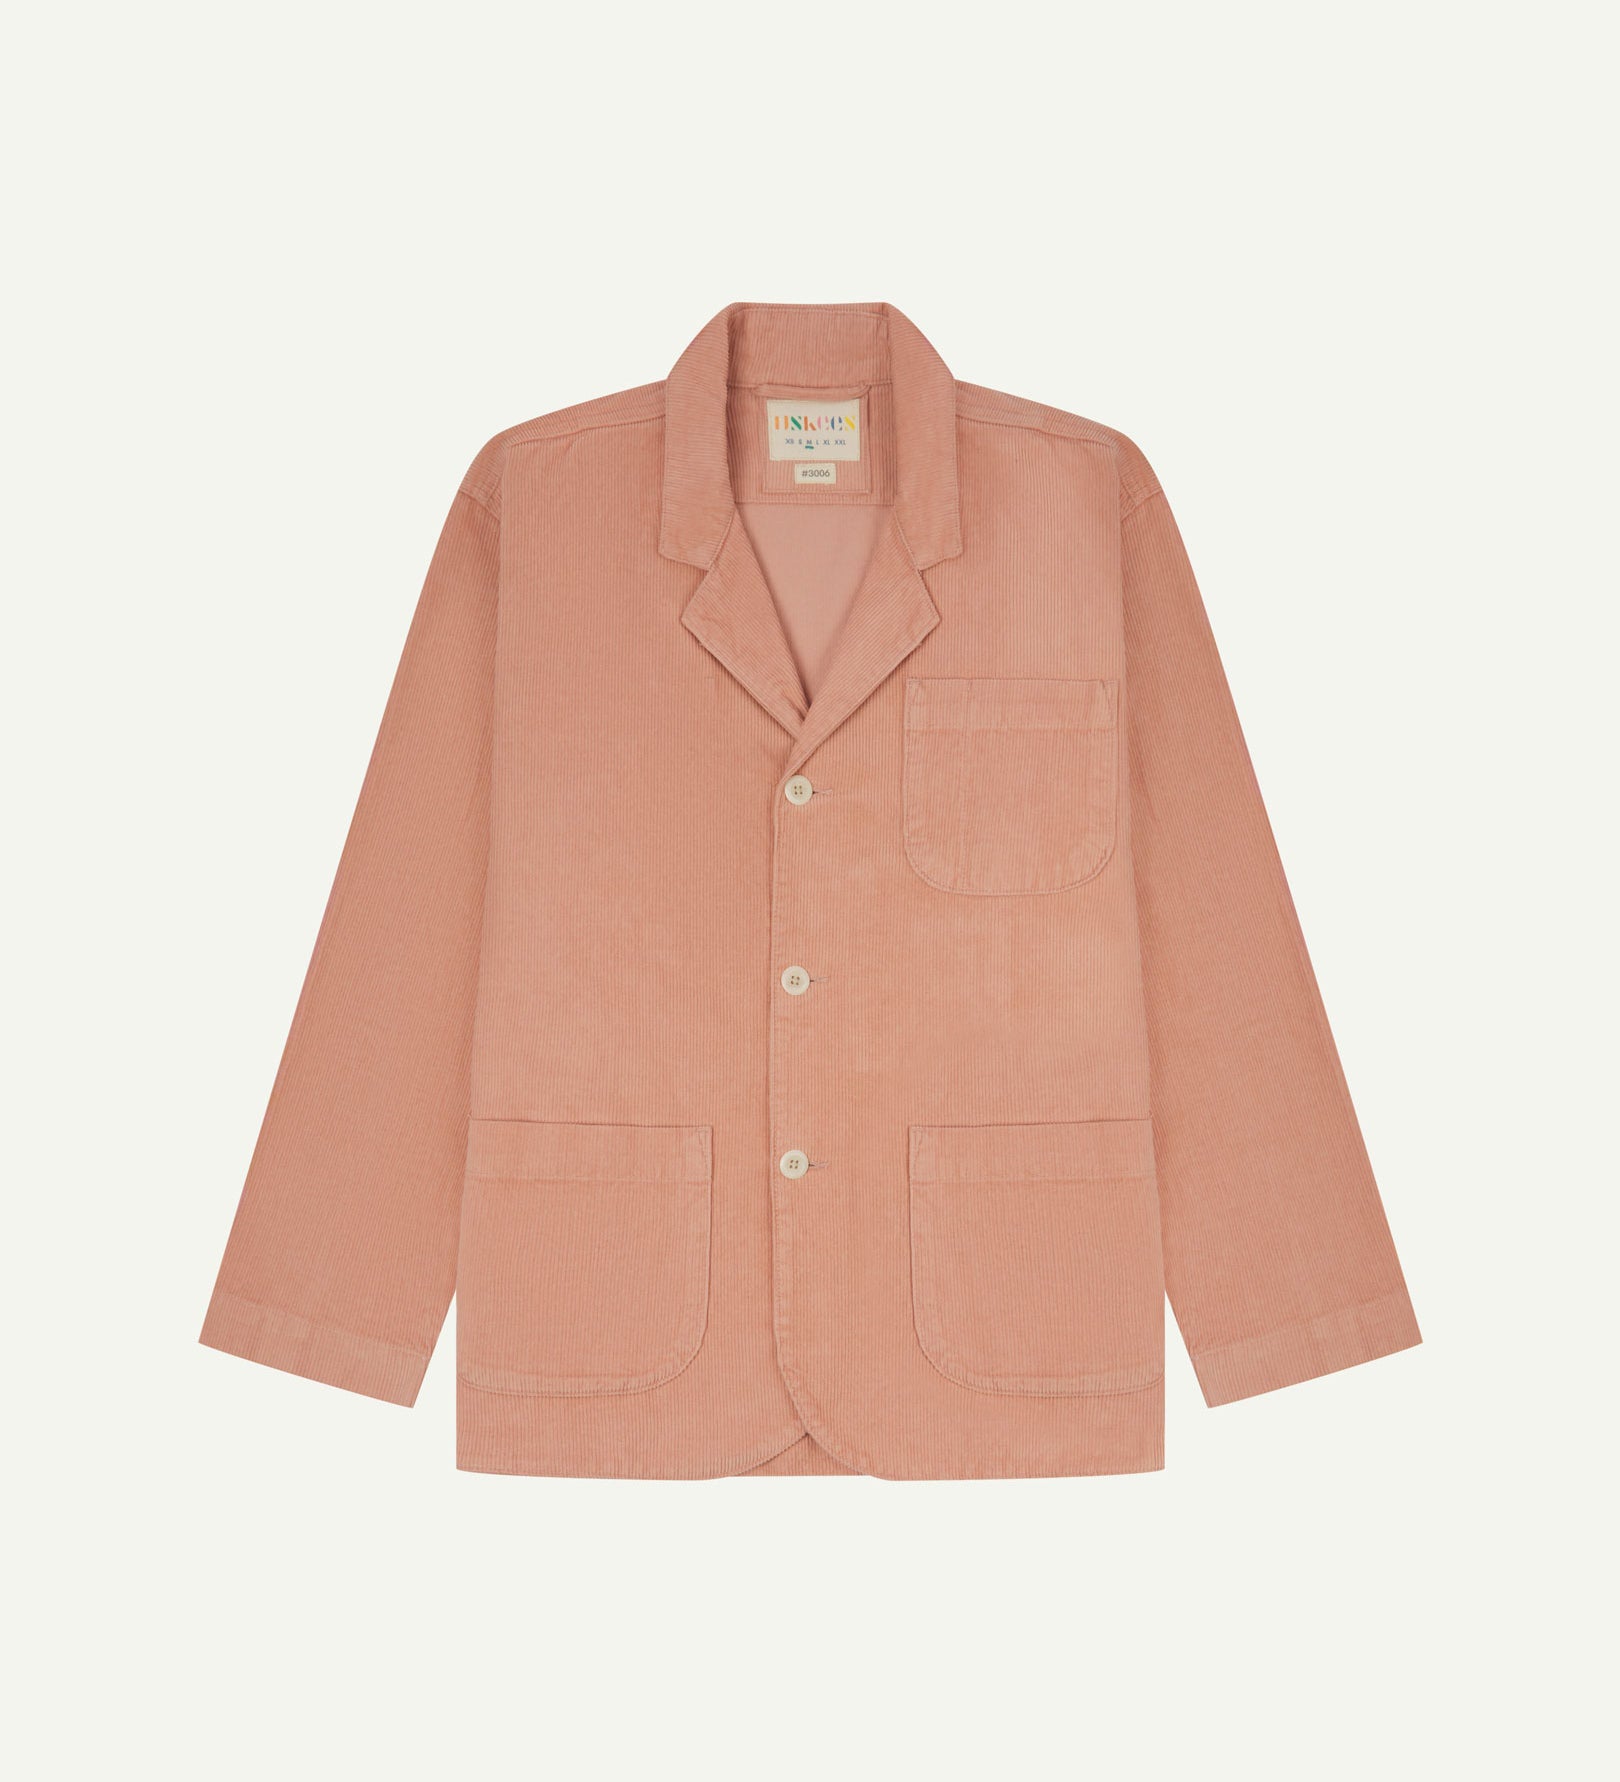 Flat front view of men's corduroy 'dusty pink' blazer with 3 patch pockets from Uskees. Clearly showing corozo buttons and 3 pockets on the front.